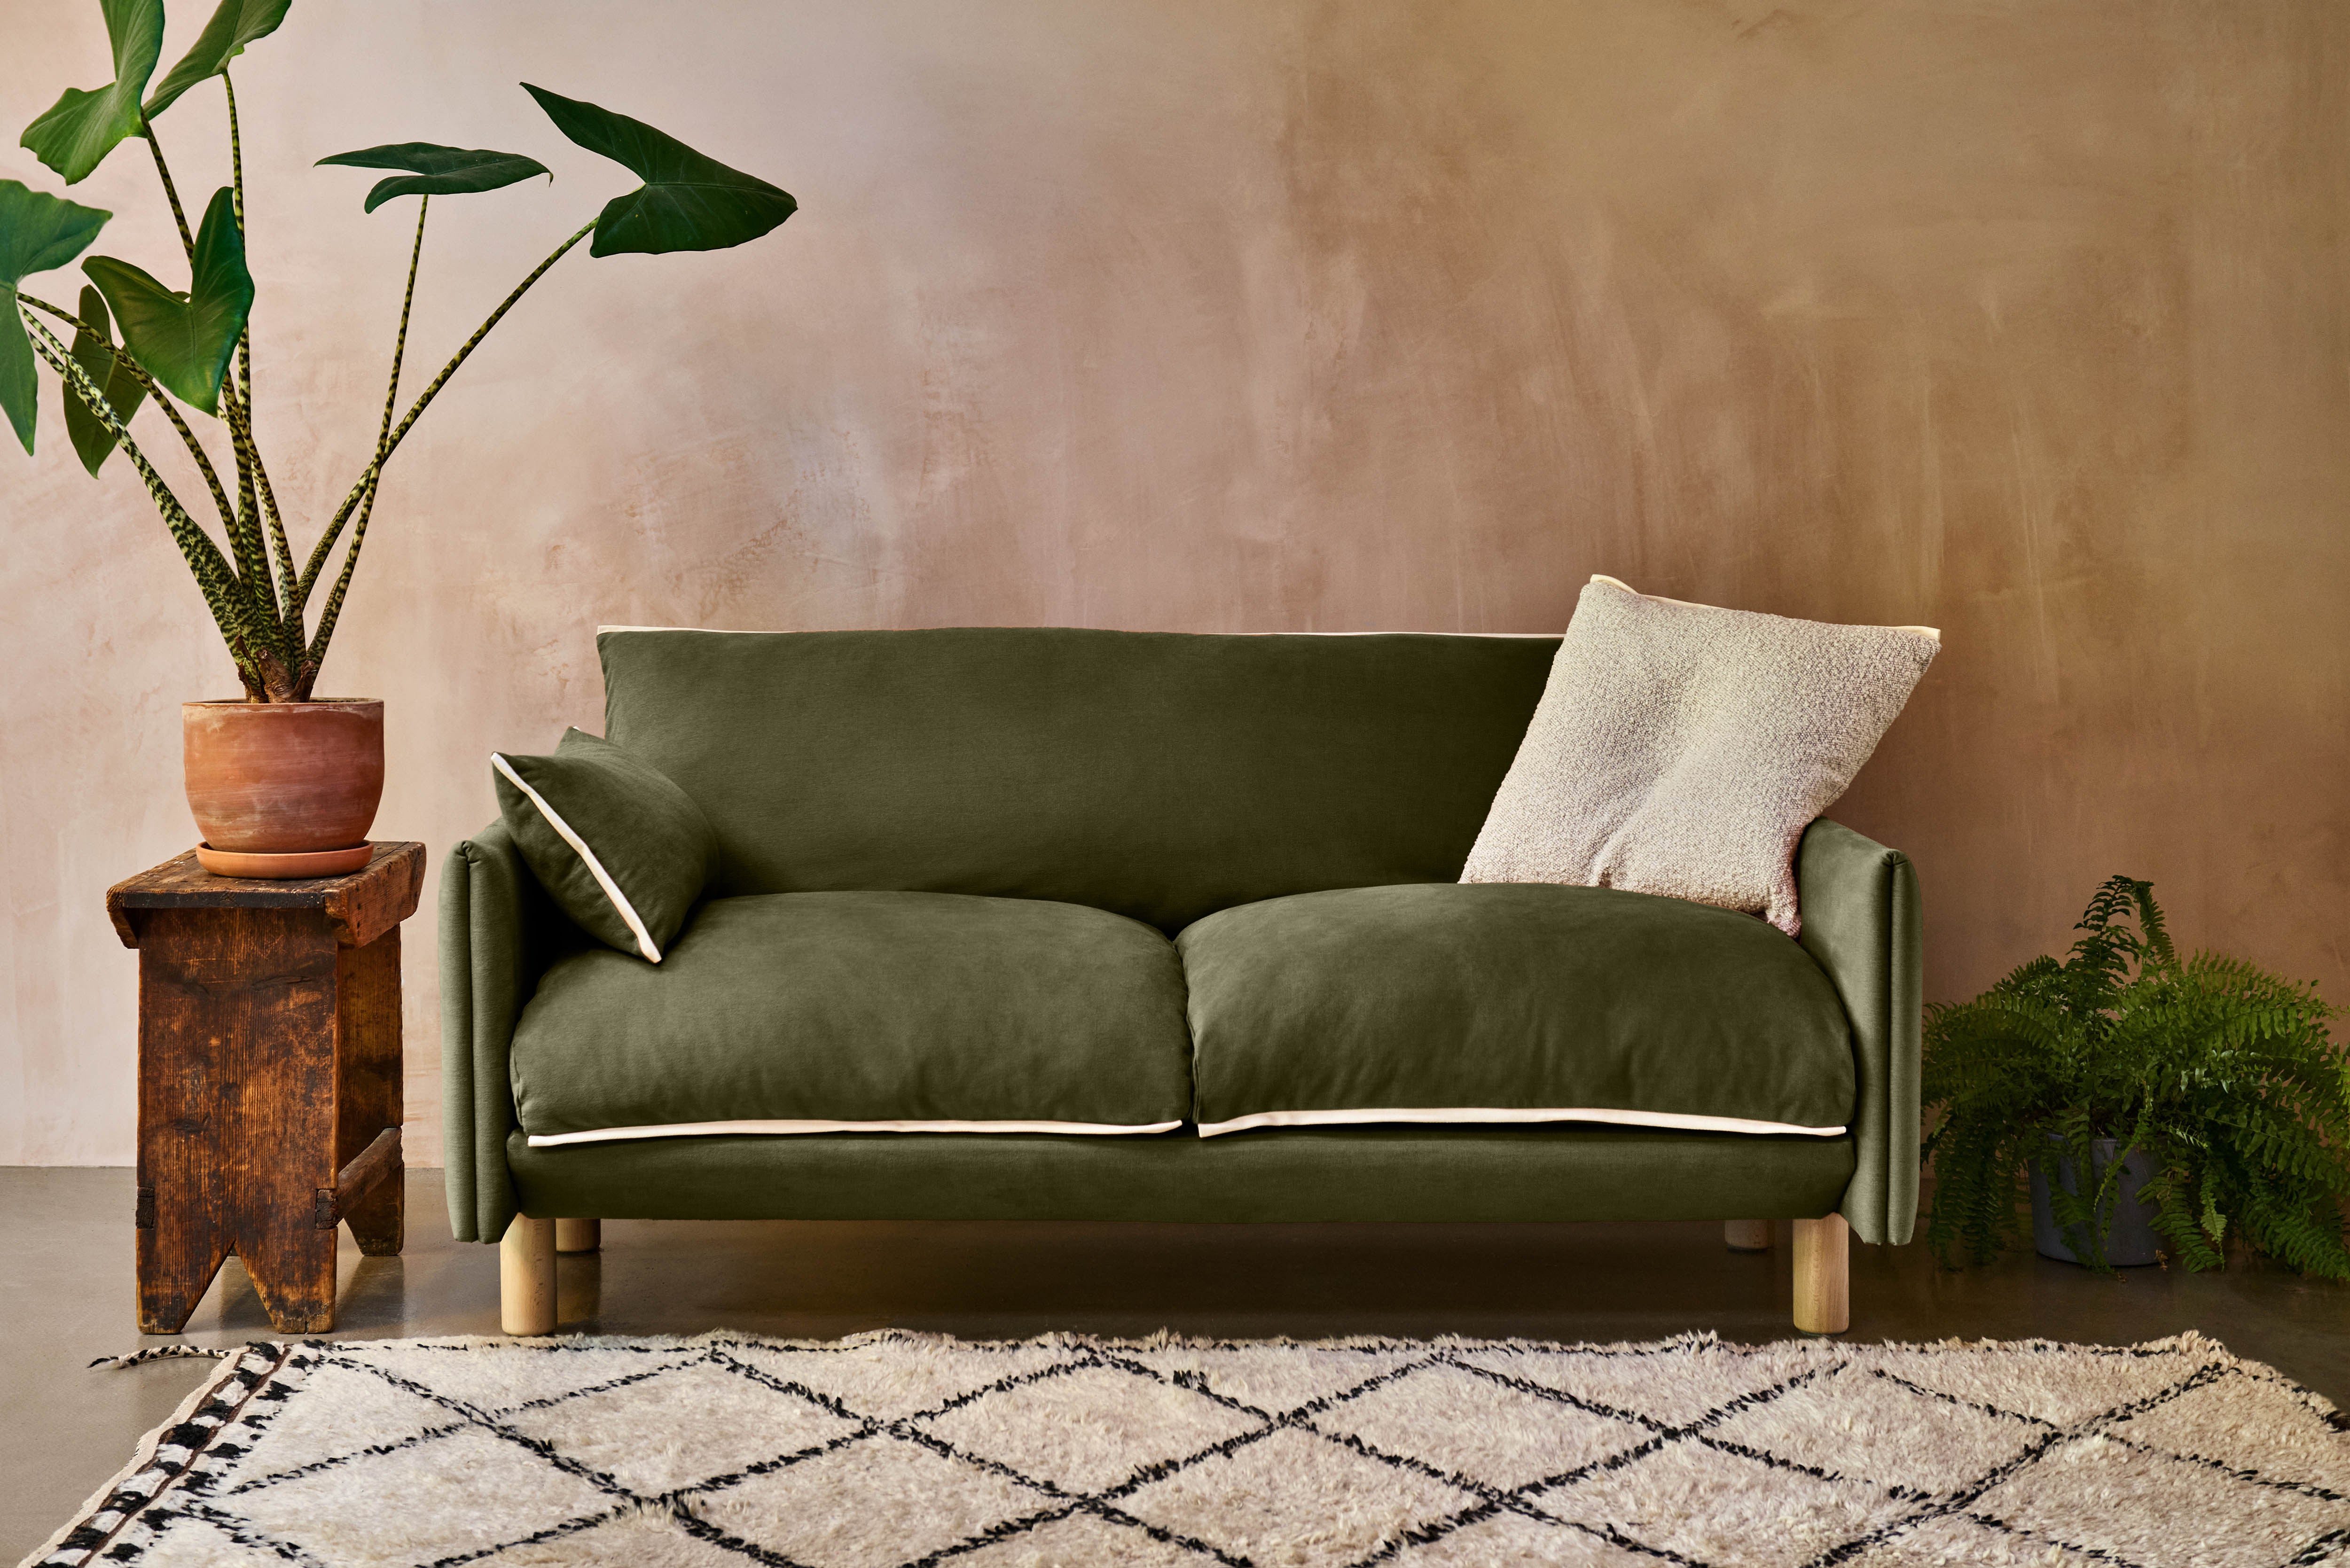  How to Style a Green Sofa